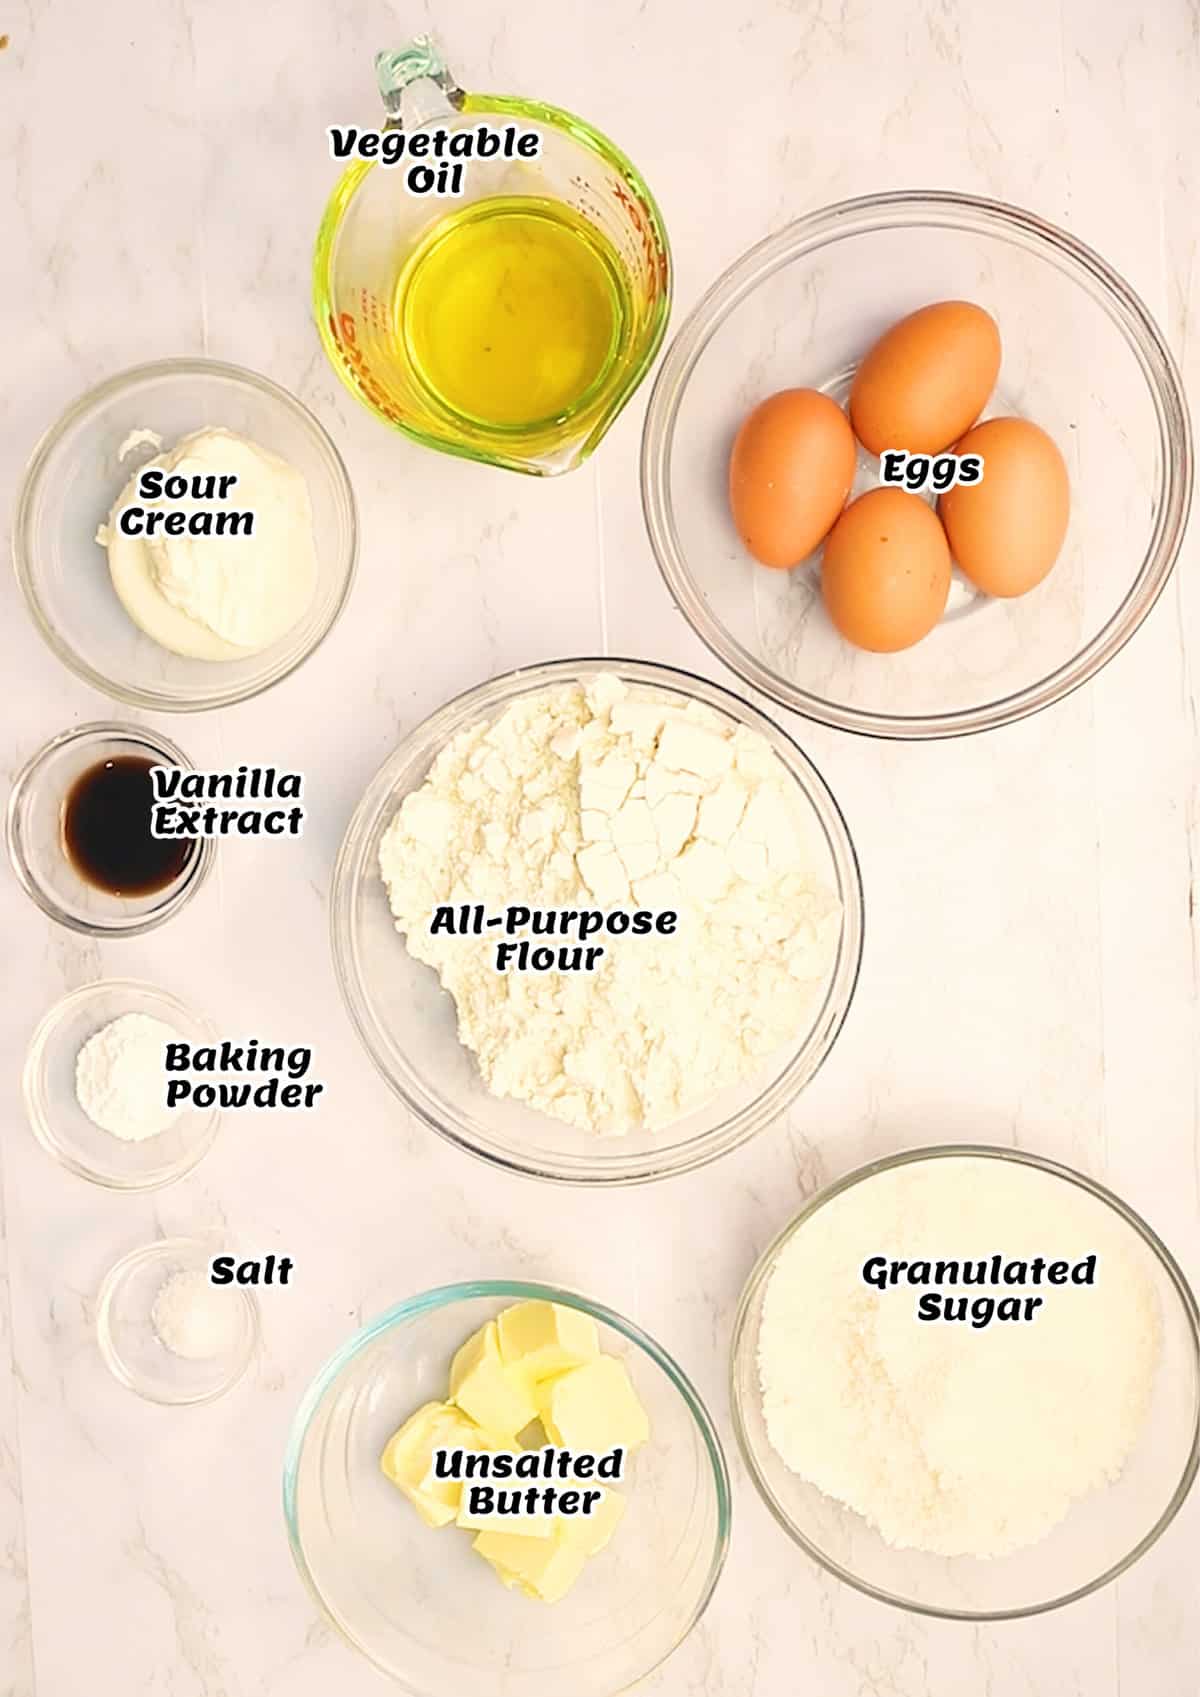 What you need for this recipe